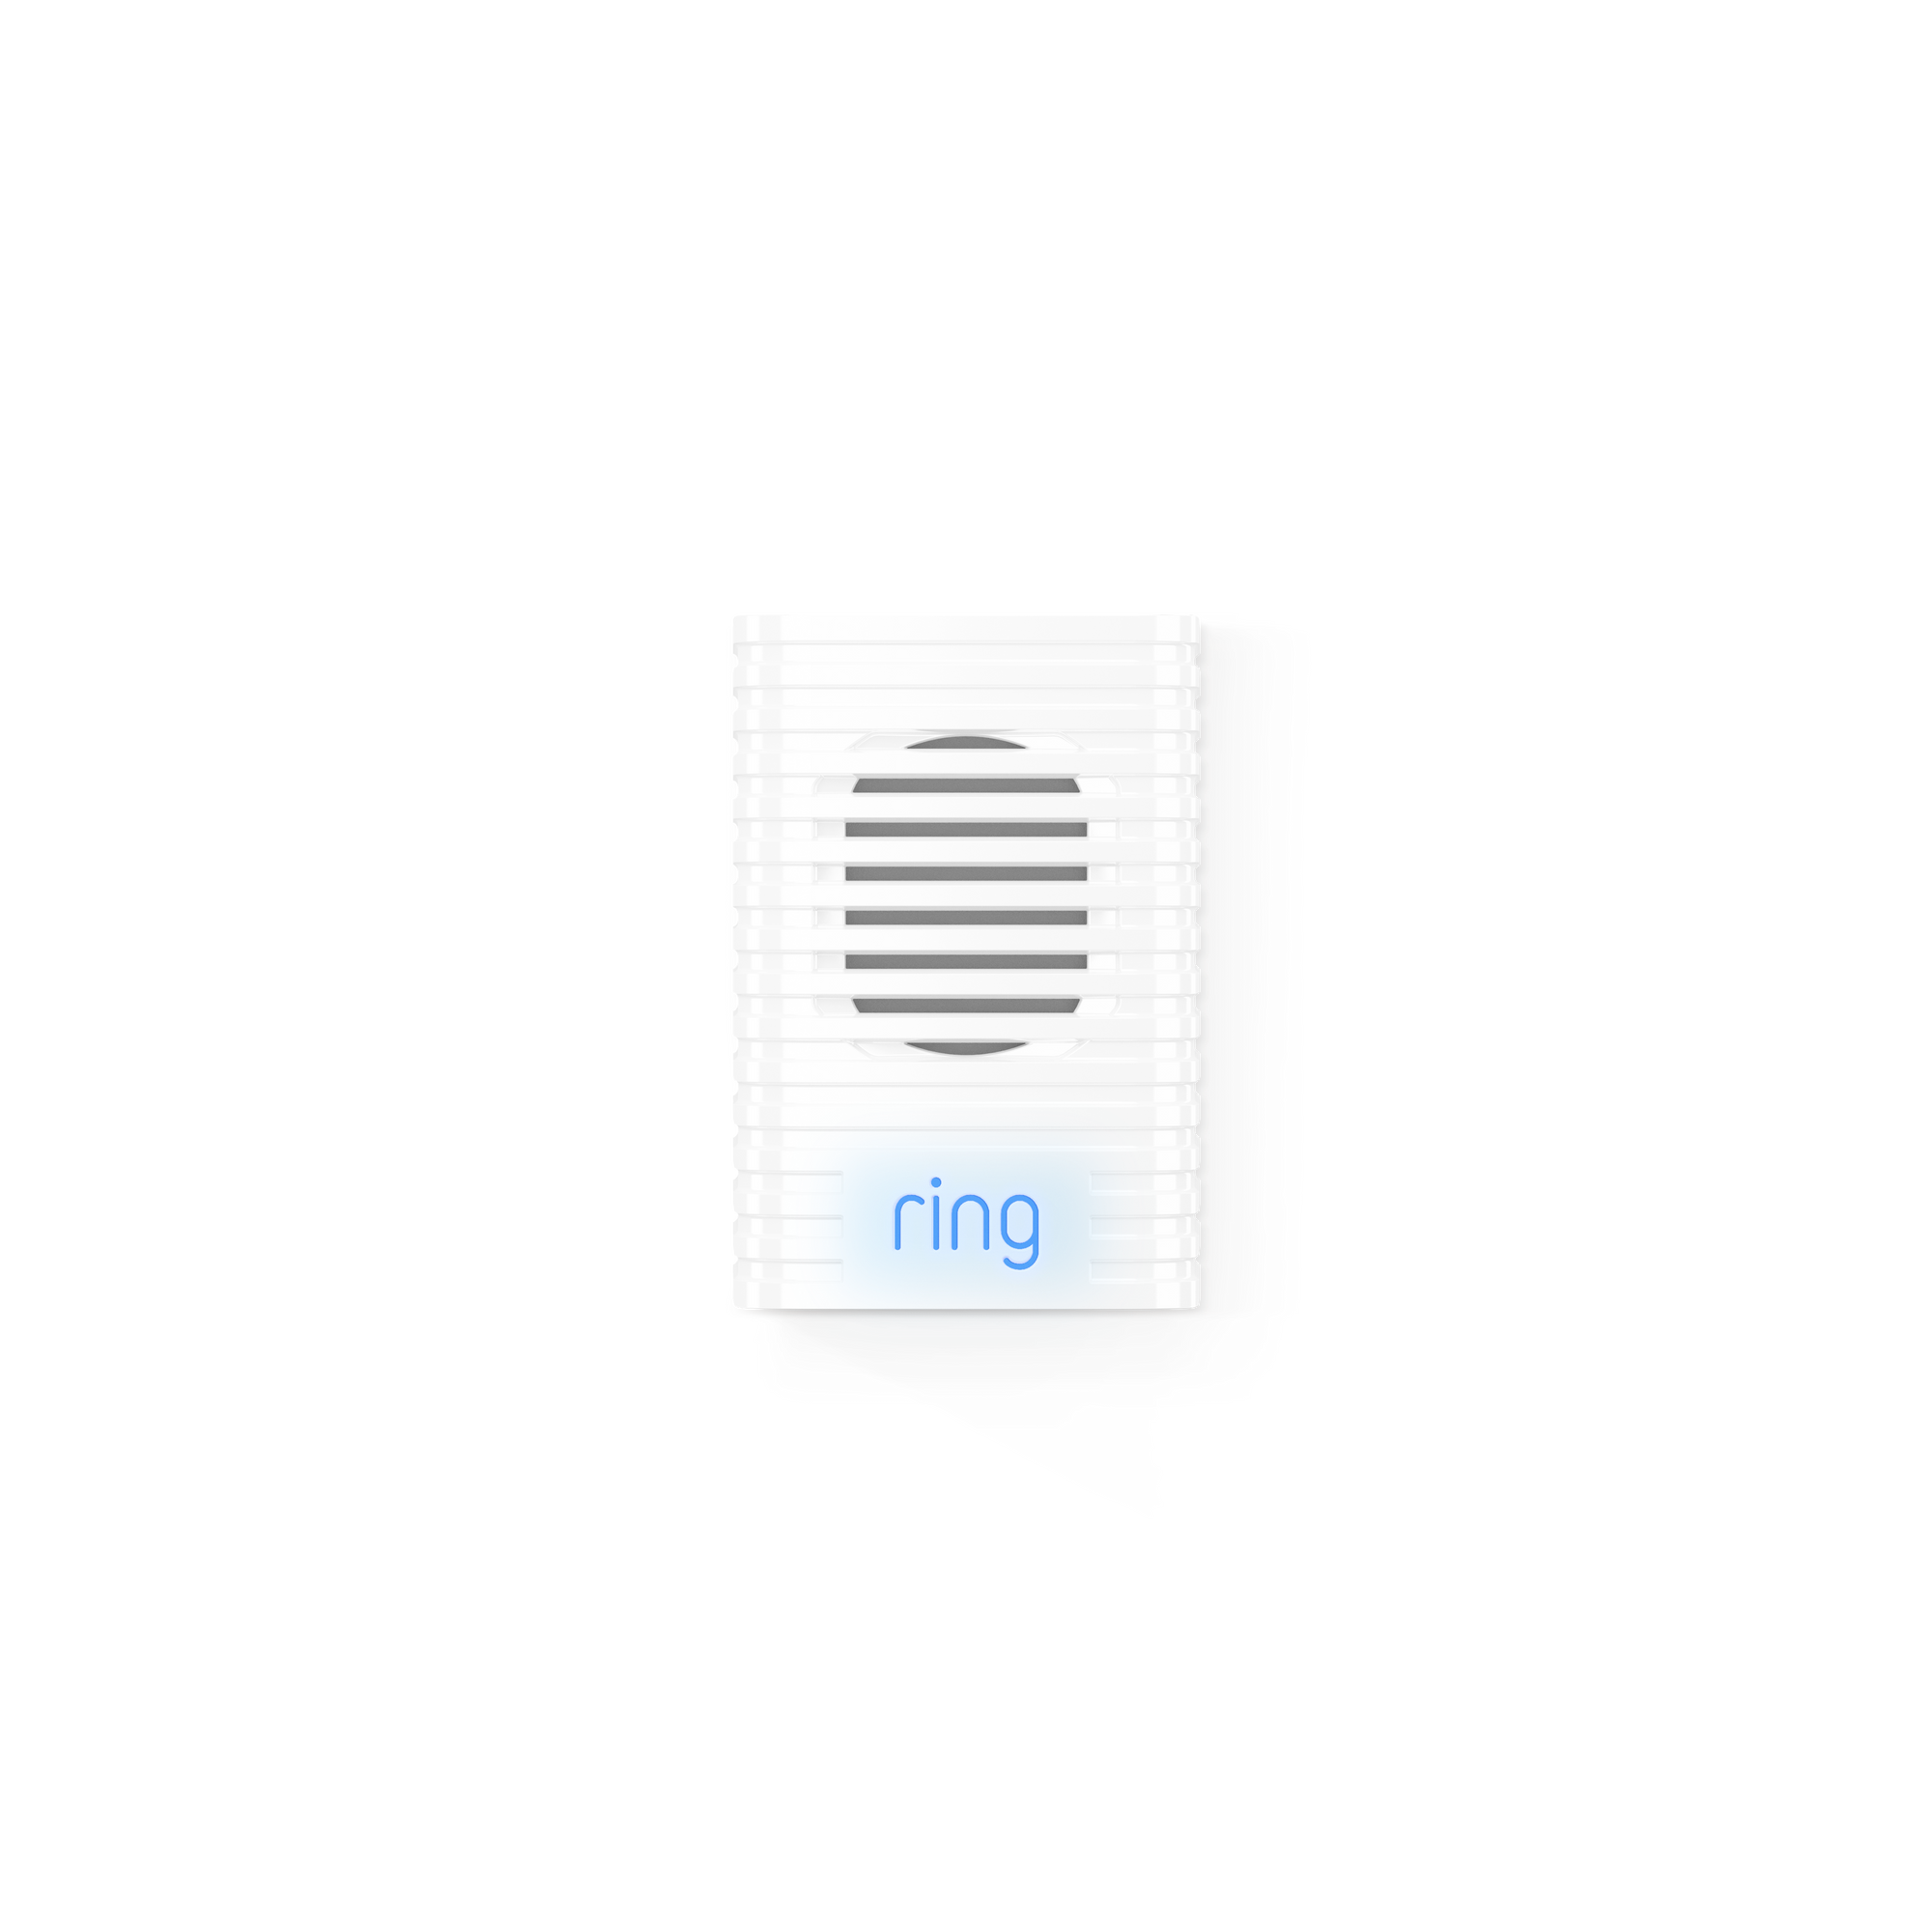 ring doorbell additional chime